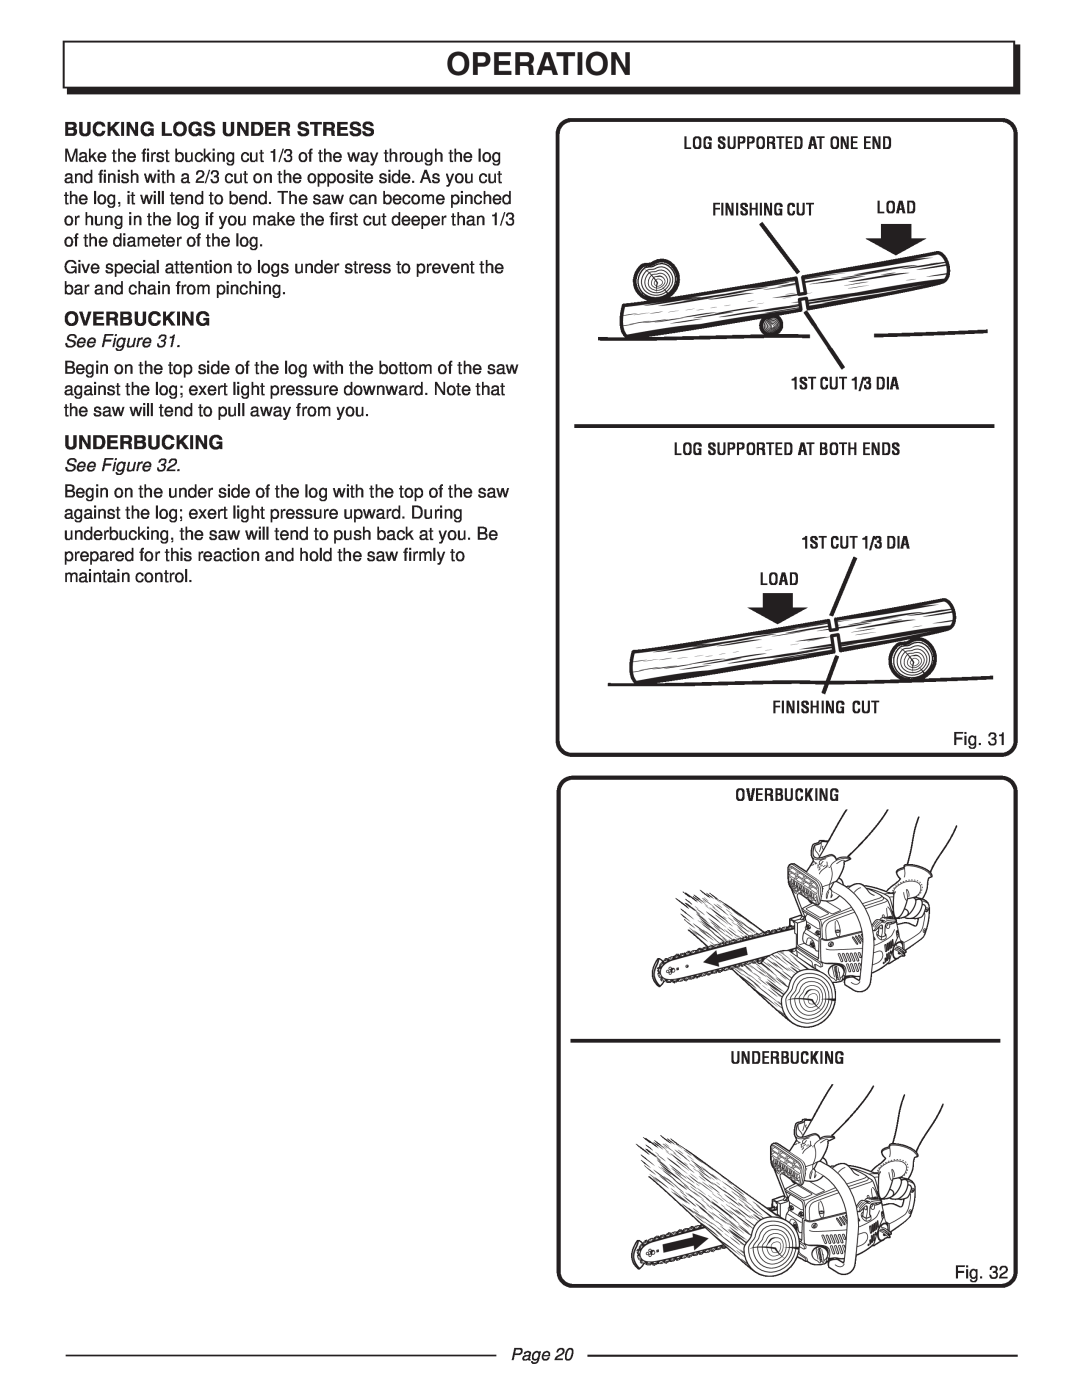 Homelite UT10510A manual Operation, Bucking Logs Under Stress, Overbucking, Underbucking, See Figure, Page 